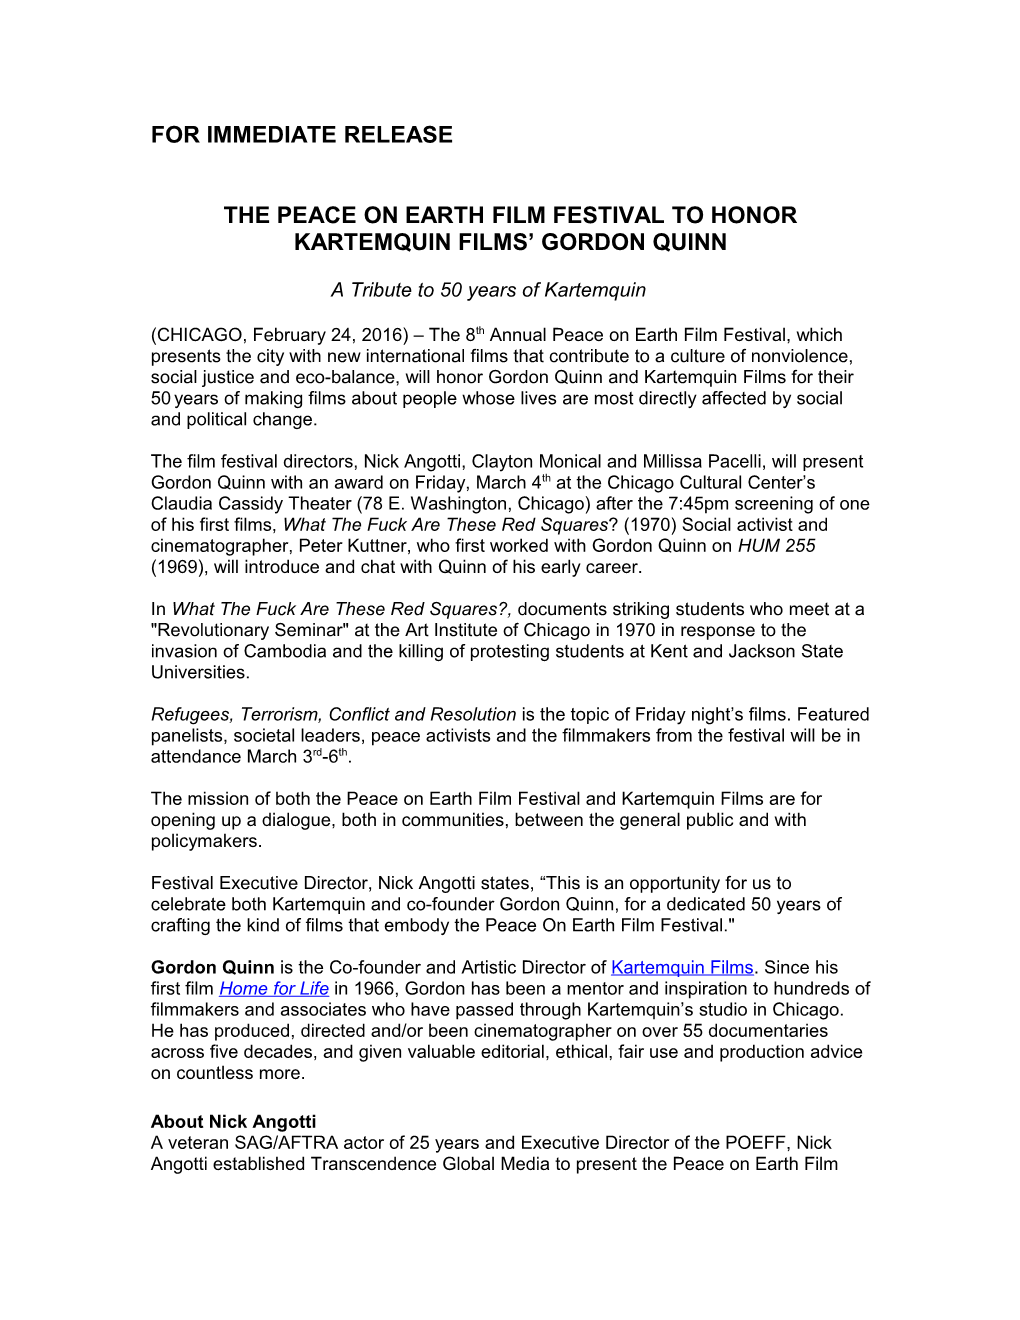 The Peace on Earth Film Festival to Honor